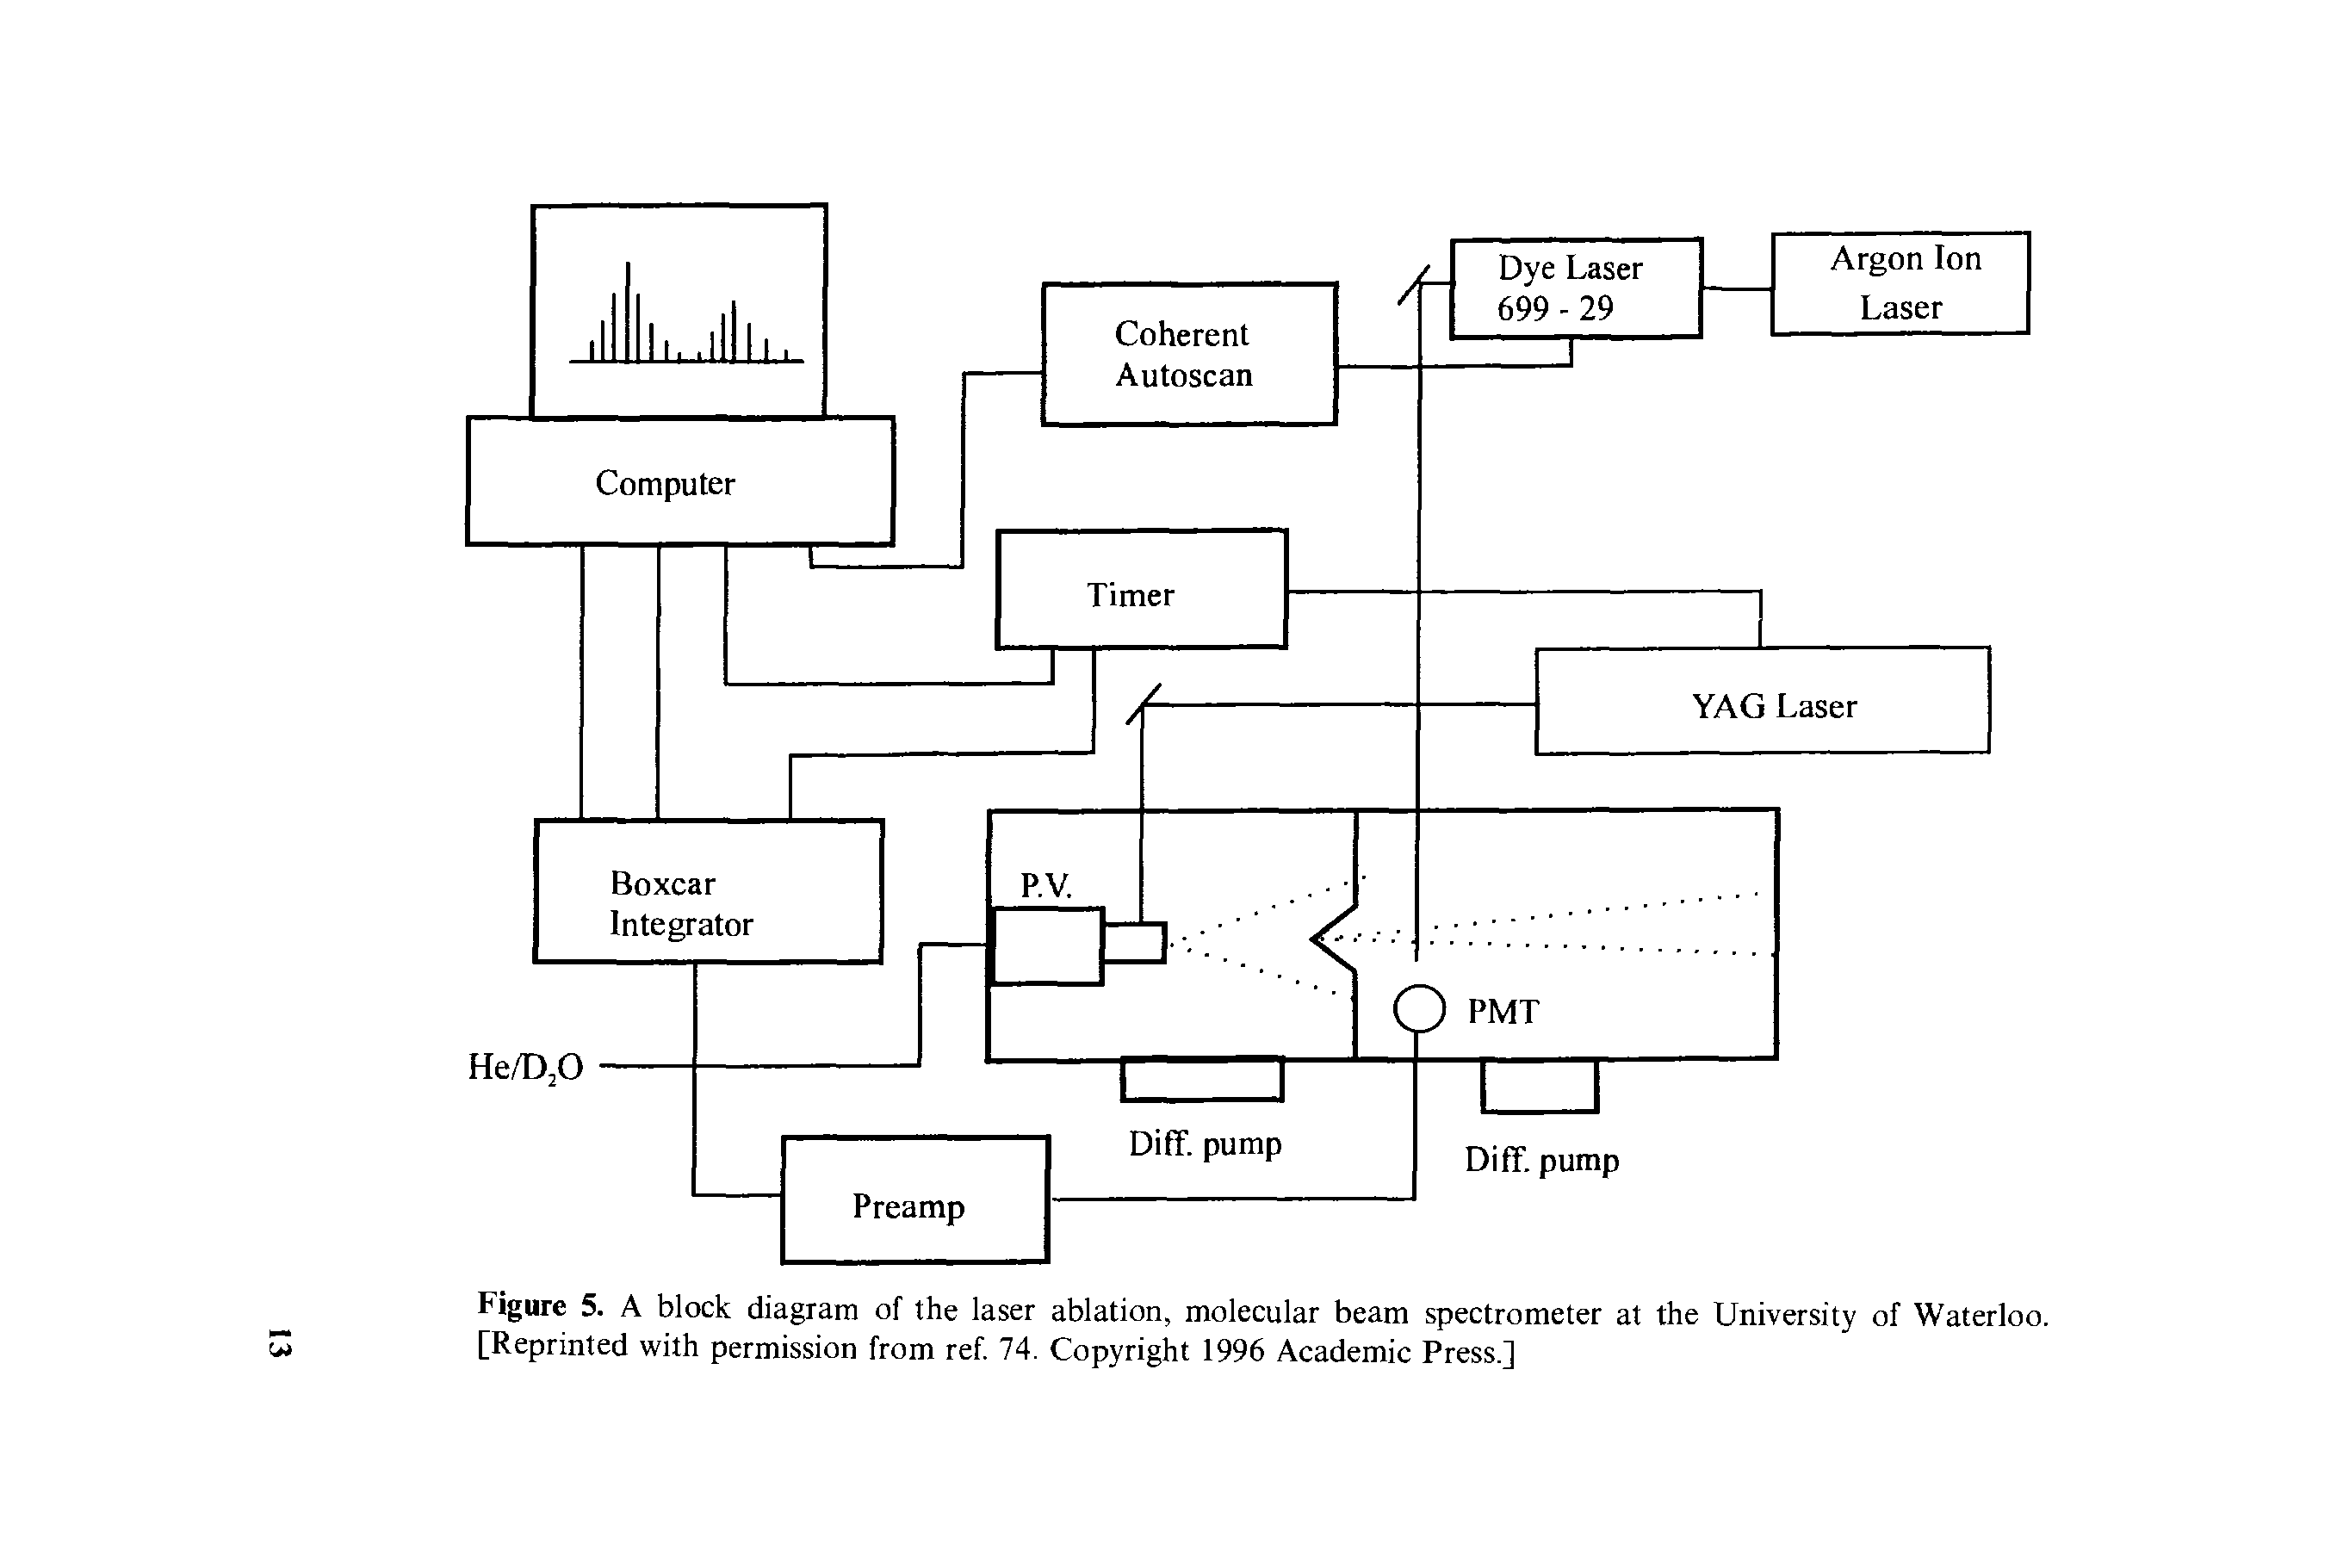 Figure 5. A block diagram of the laser ablation, molecular beam spectrometer at the University of Waterloo. [Reprinted with permission from ref. 74. Copyright 1996 Academic Press.]...